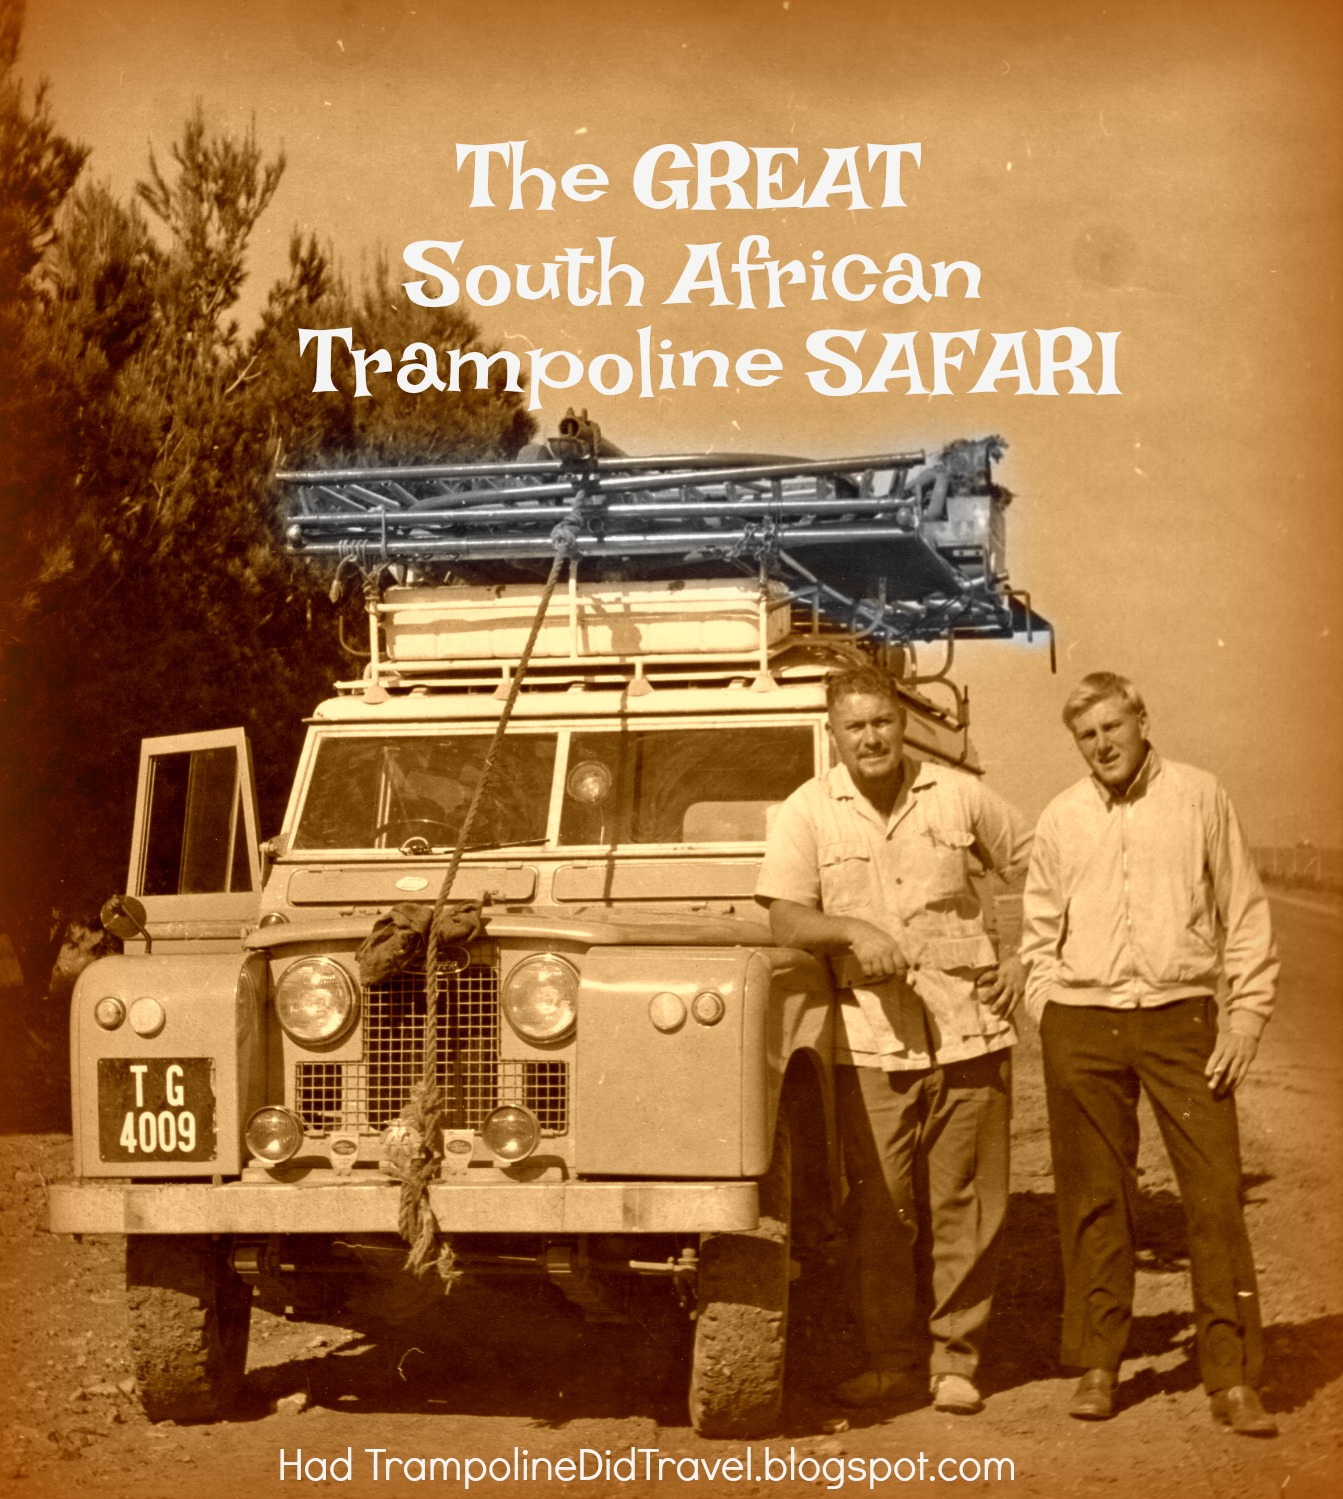 The GREAT South African Trampoline Safari